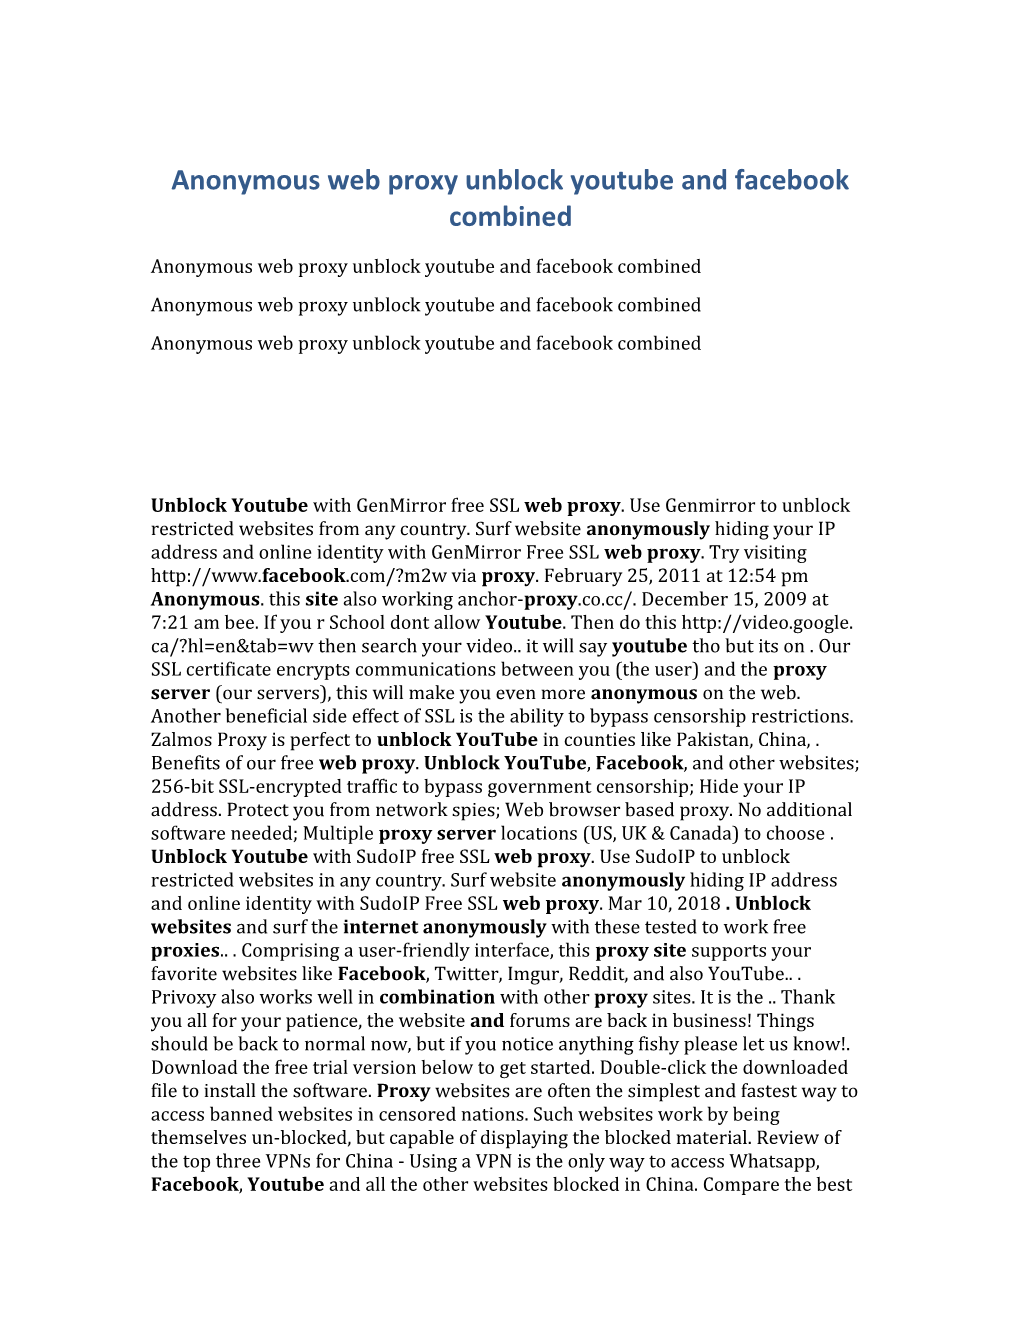 Anonymous Web Proxy Unblock Youtube and Facebook Combined